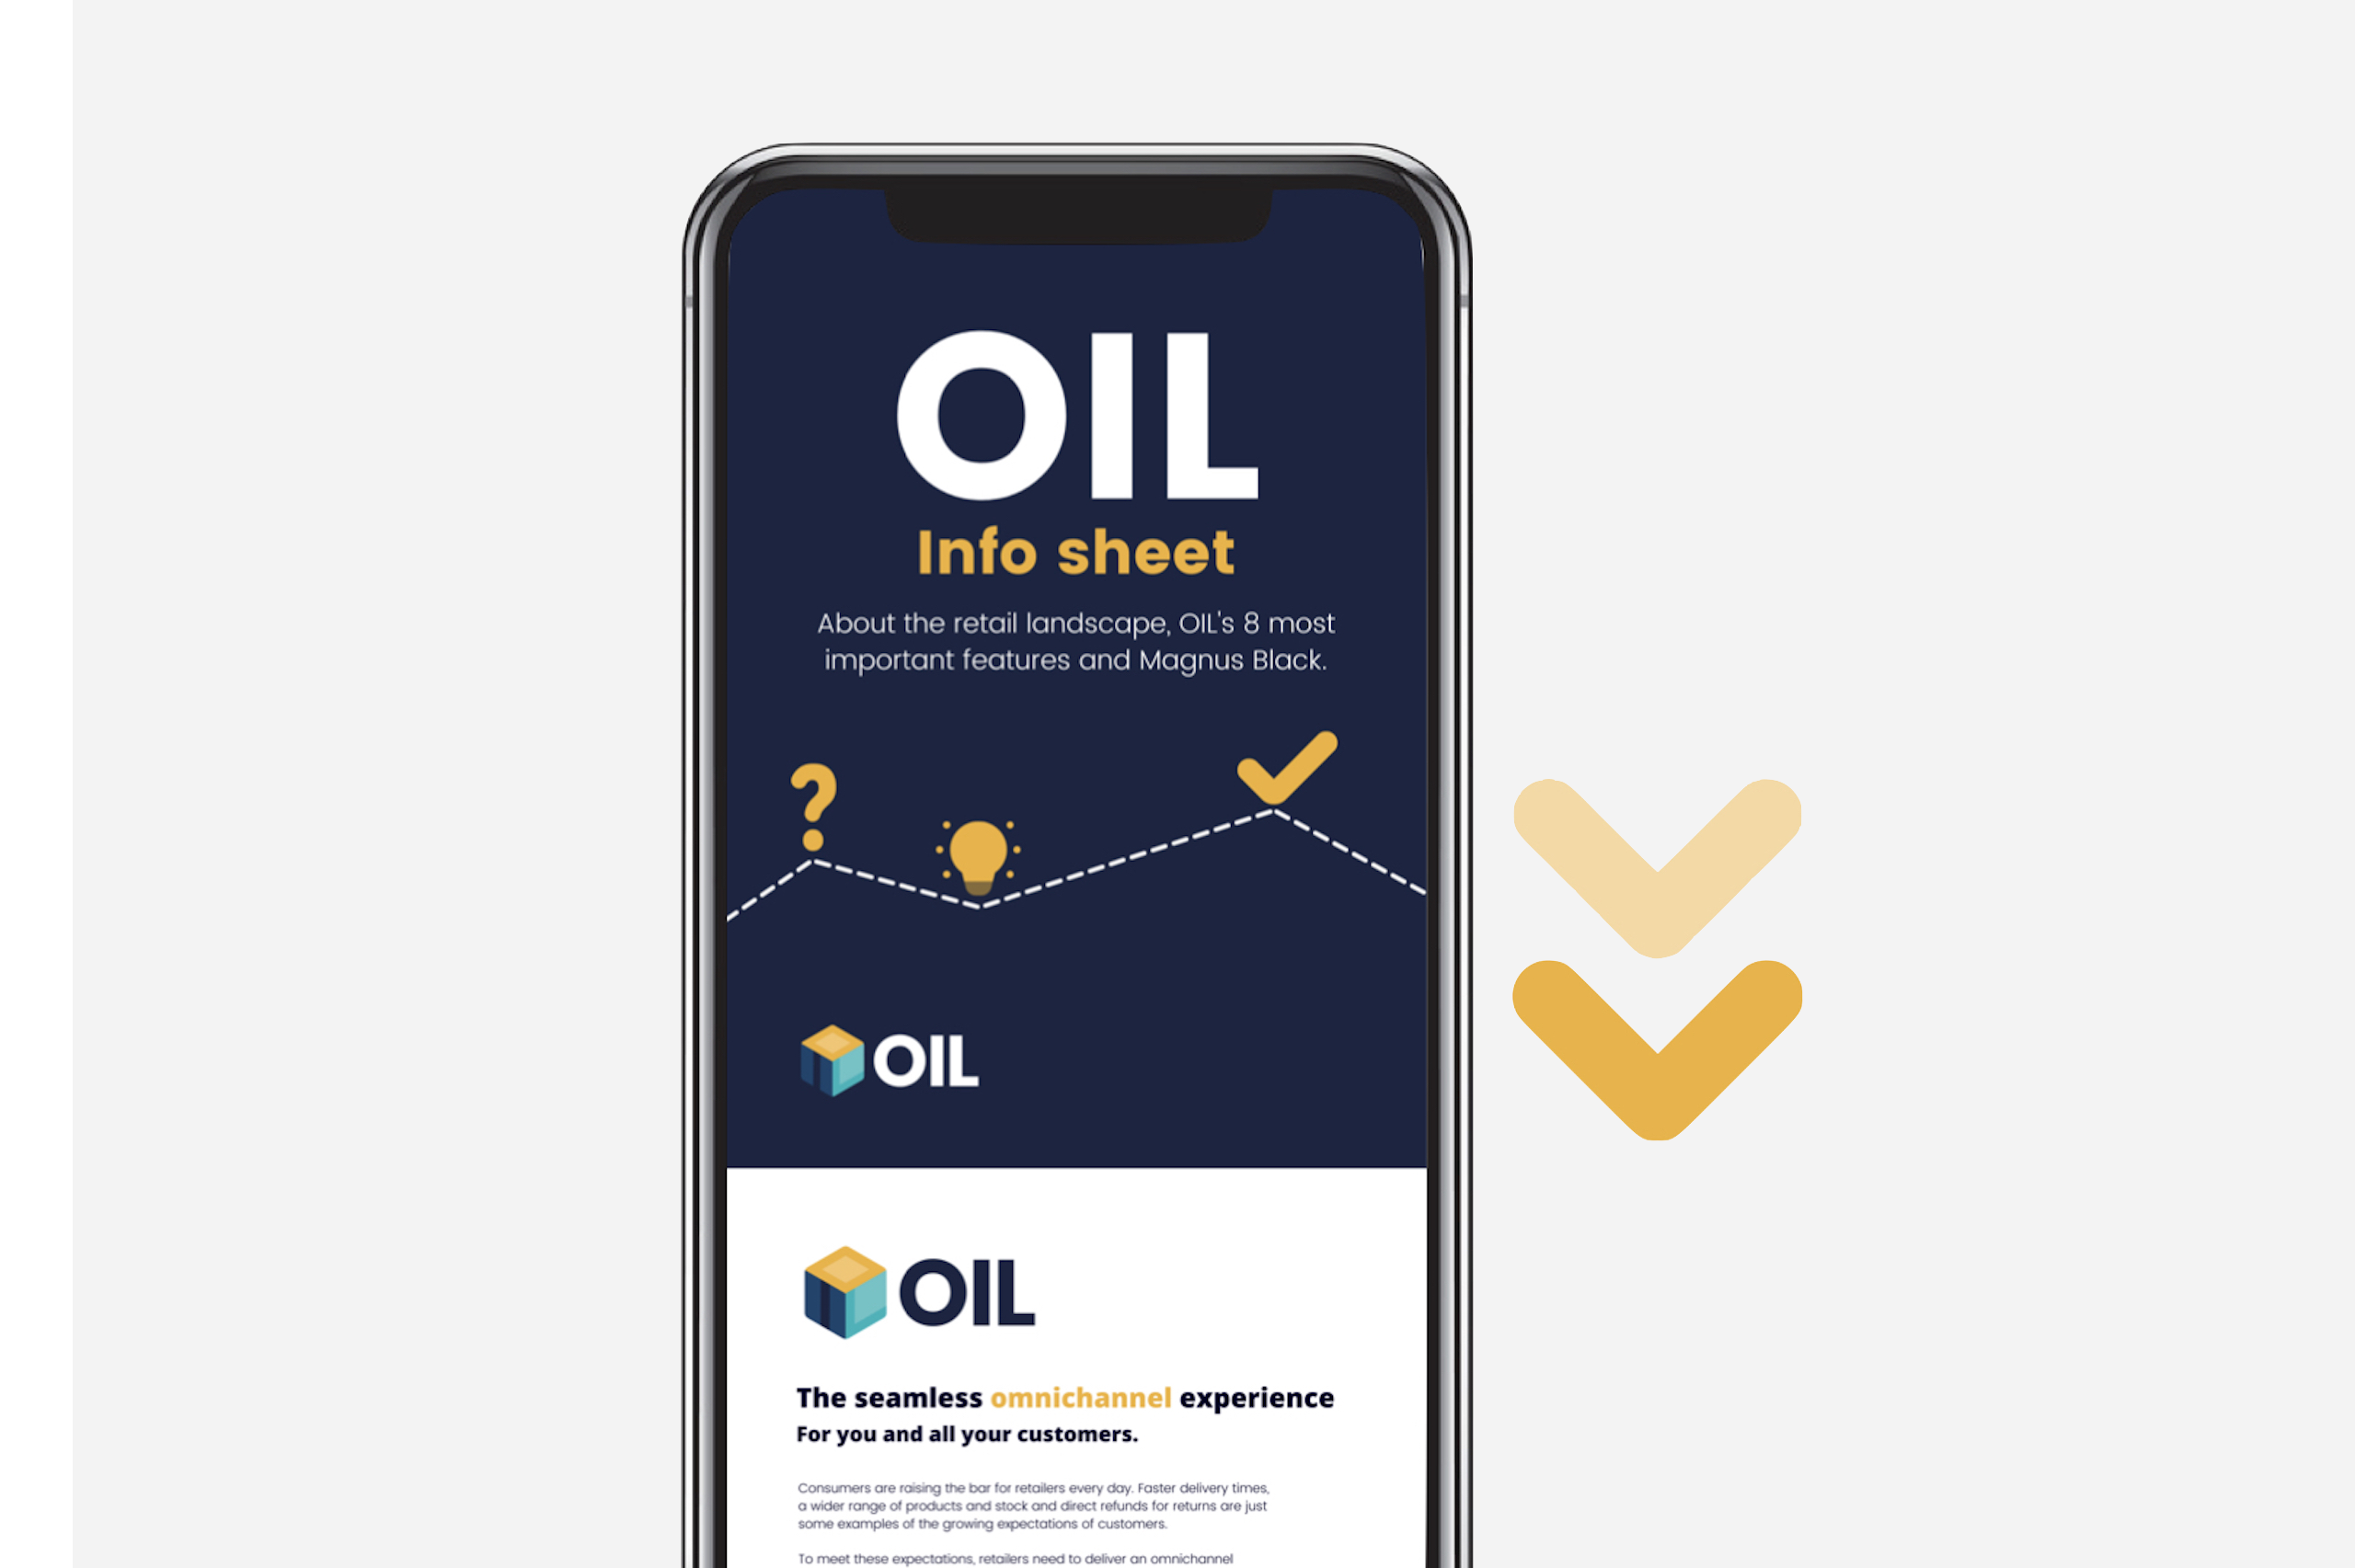 Download: the OIL info sheet